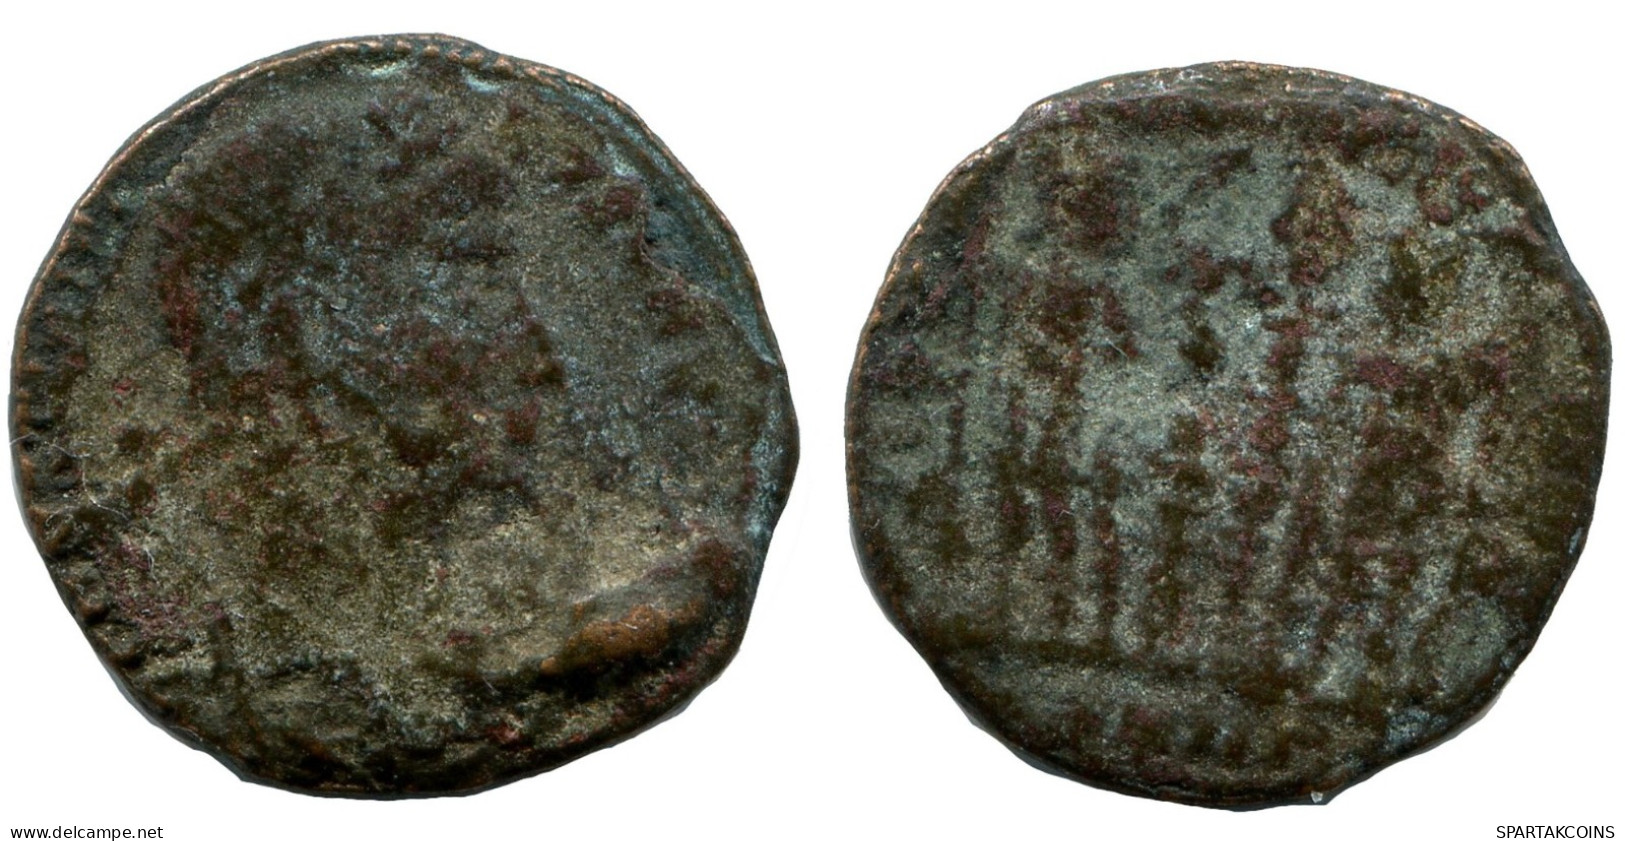 CONSTANTINE I MINTED IN NICOMEDIA FROM THE ROYAL ONTARIO MUSEUM #ANC10876.14.D.A - The Christian Empire (307 AD Tot 363 AD)